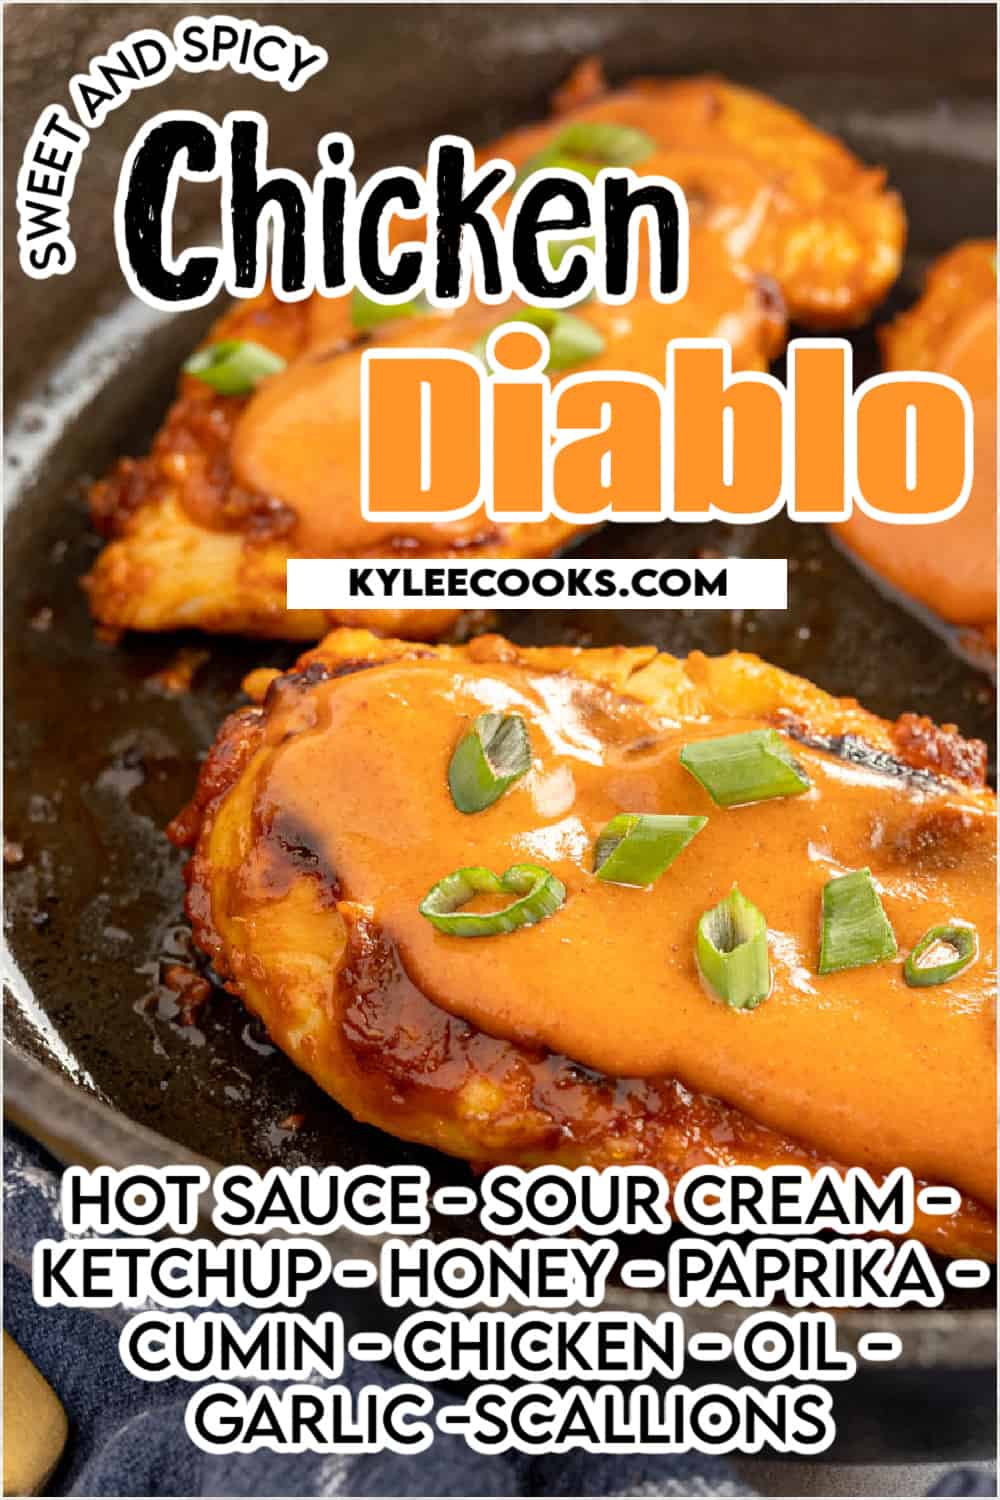 Chicken breasts in a skillet with sauce and green onions with recipe name and ingredients overlaid in text.